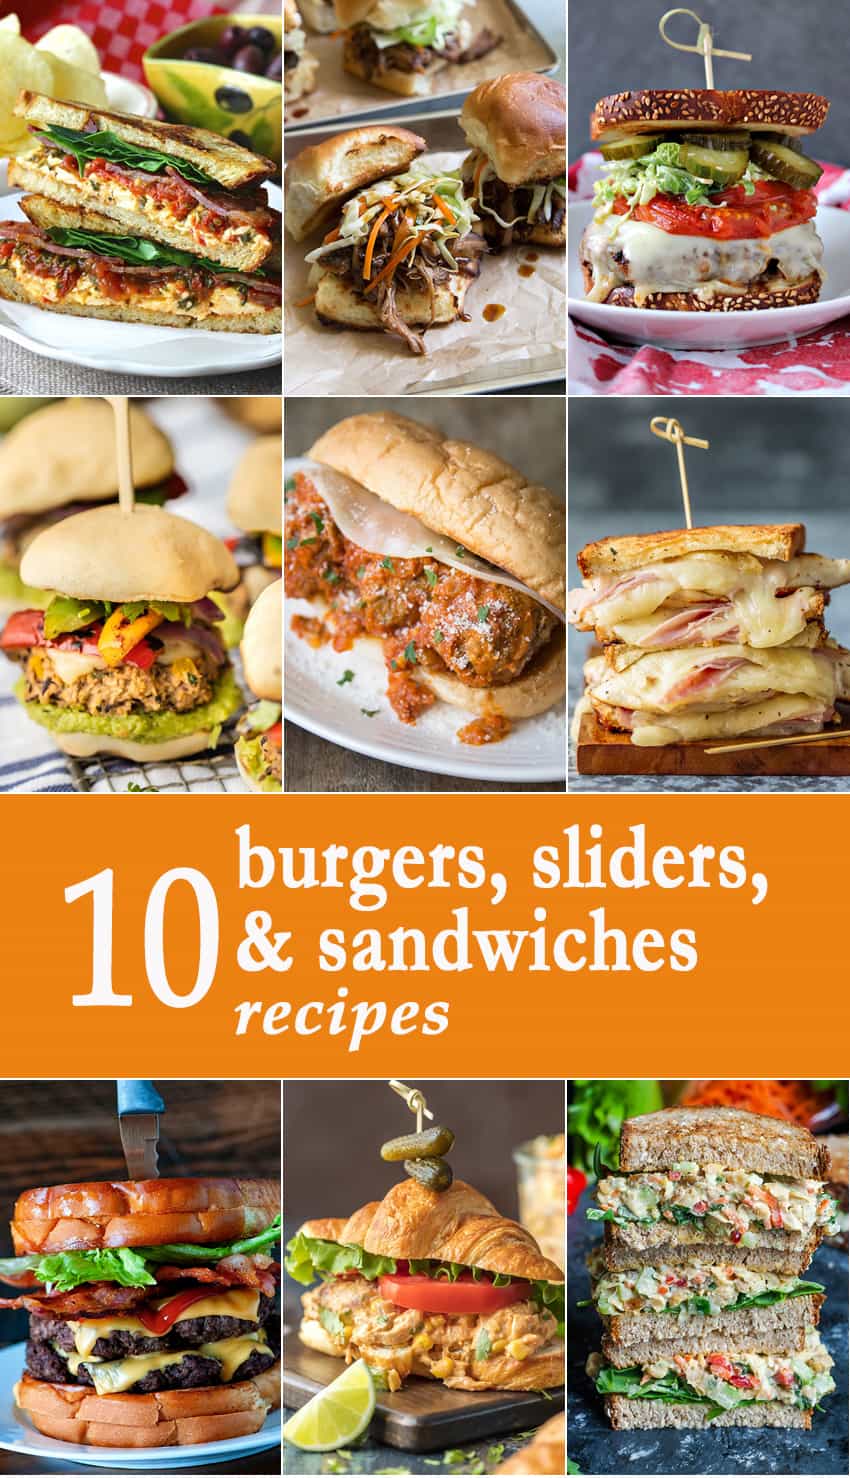 10 Burgers, Sliders, and Sandwiches